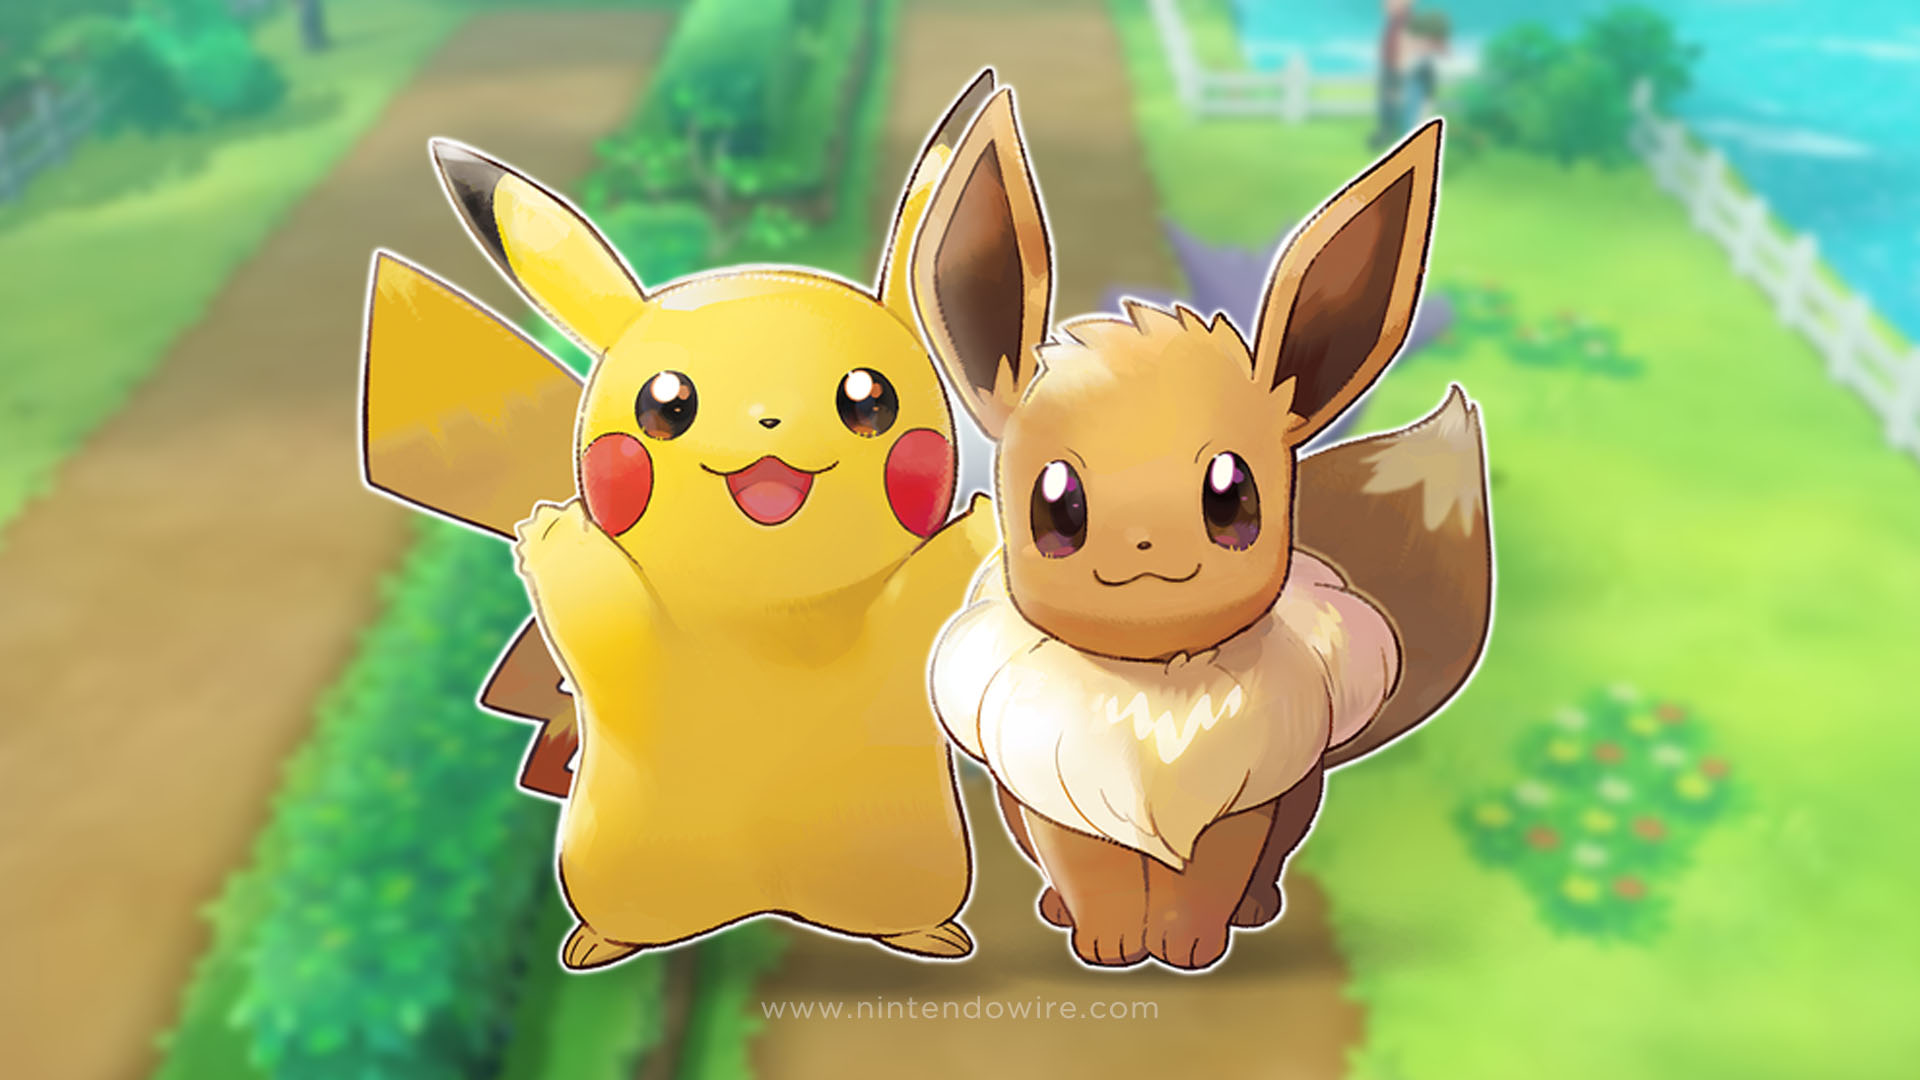 Accessibility In Let's Go, Pikachu and Let's Go, Eevee, by Kev